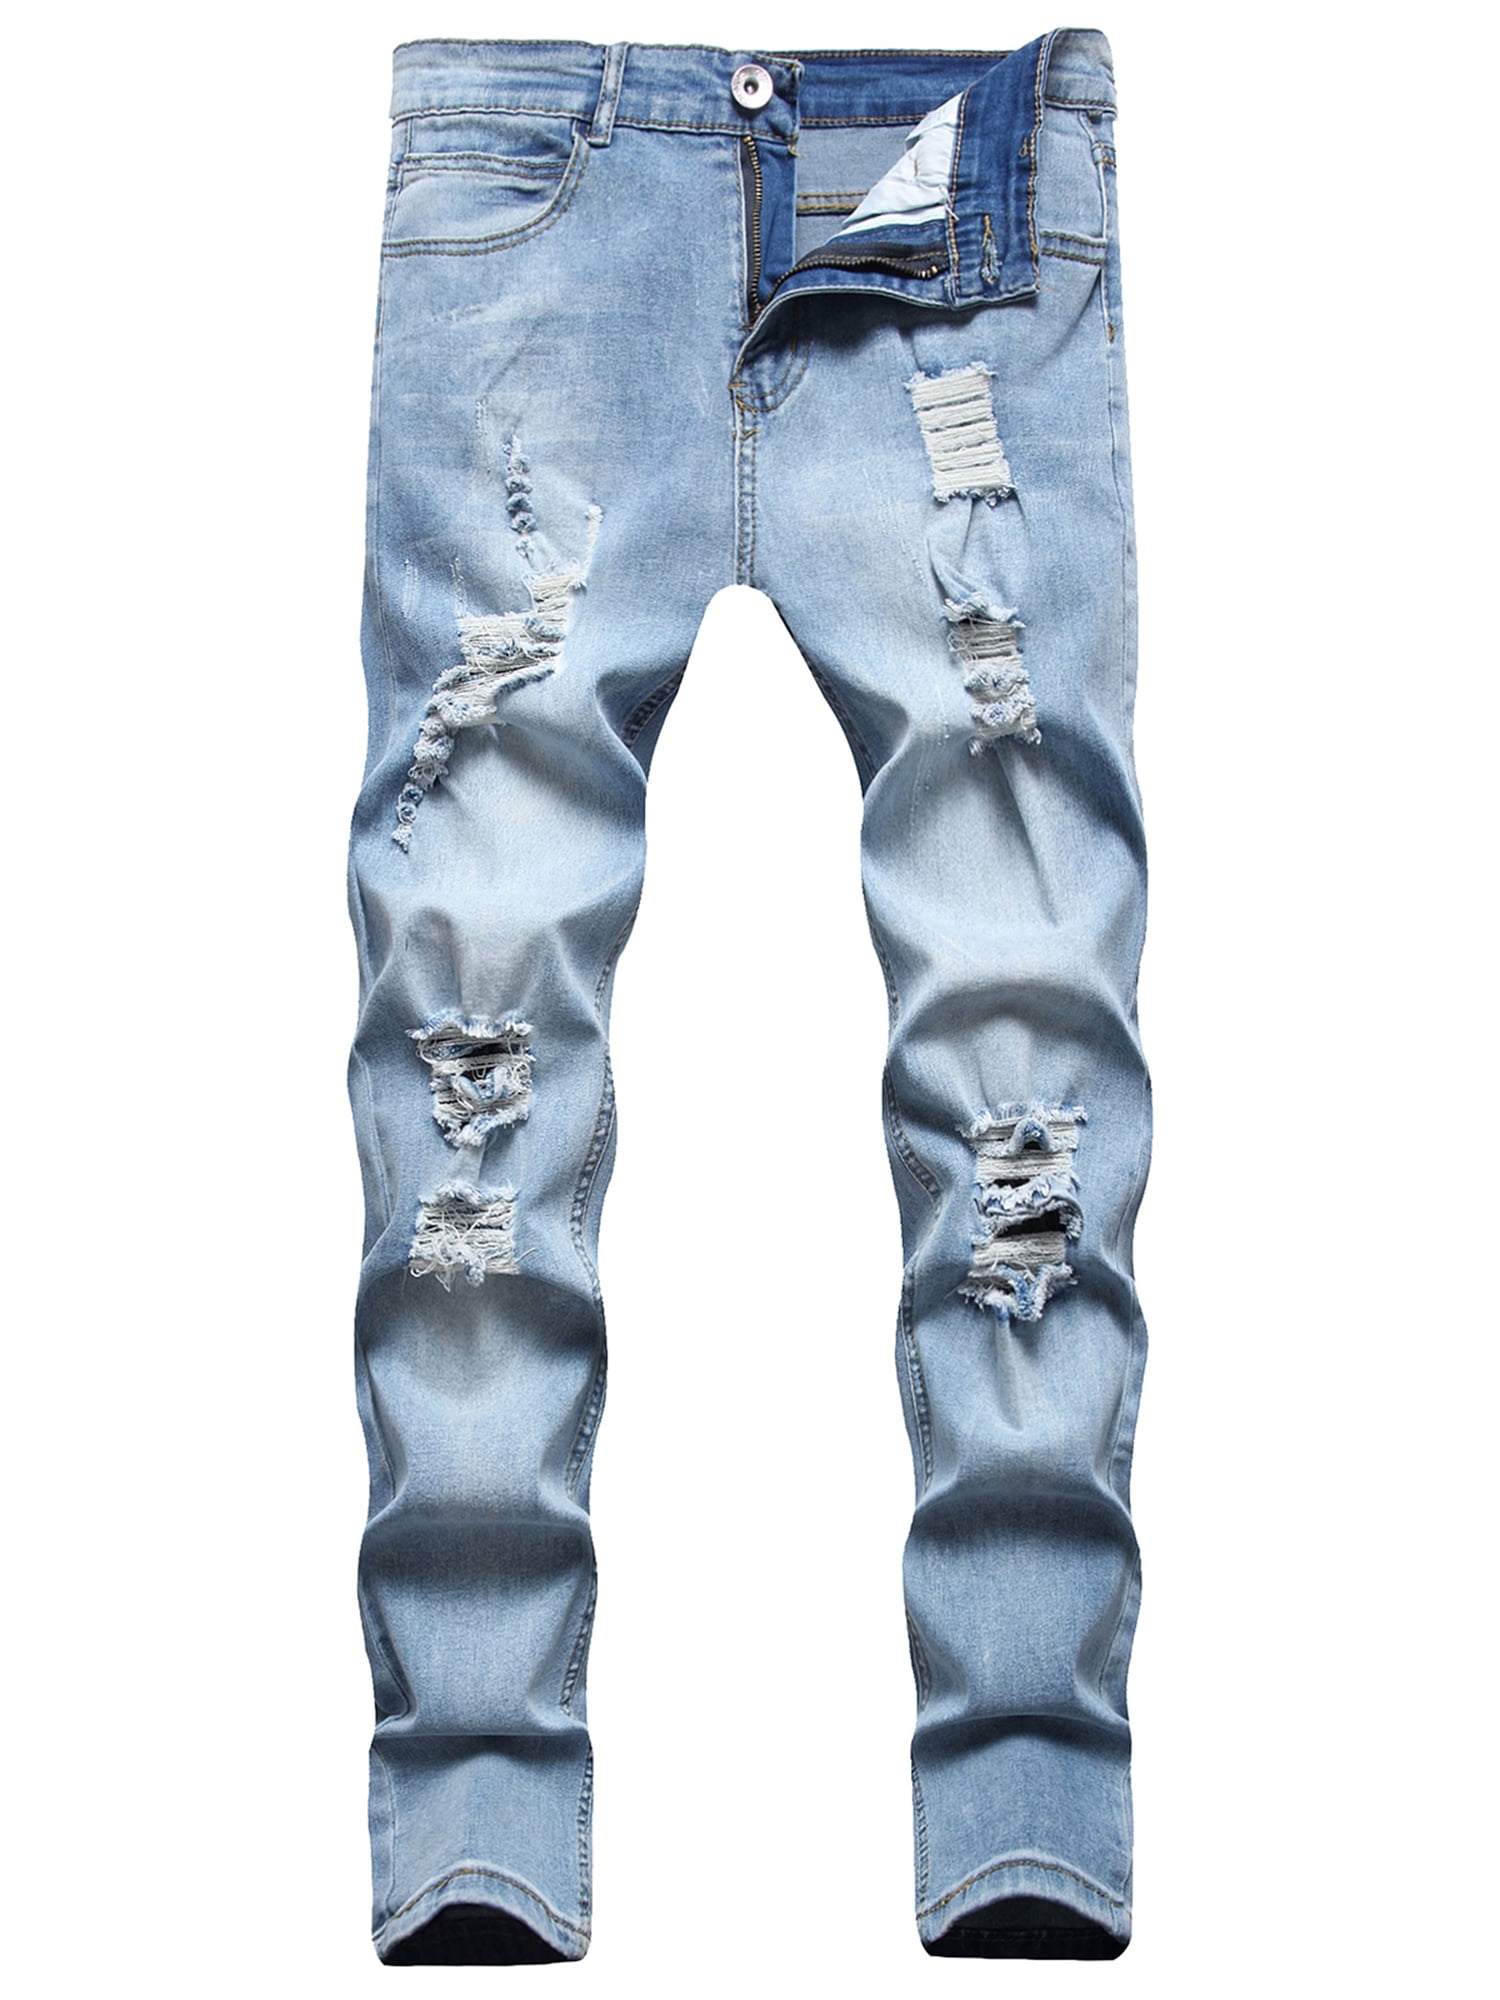 Slim-Fit Ripped Pants New Men's Painted Jeans Patch Pants | Ripped jeans men,  Slim fit ripped jeans, Ripped denim pants